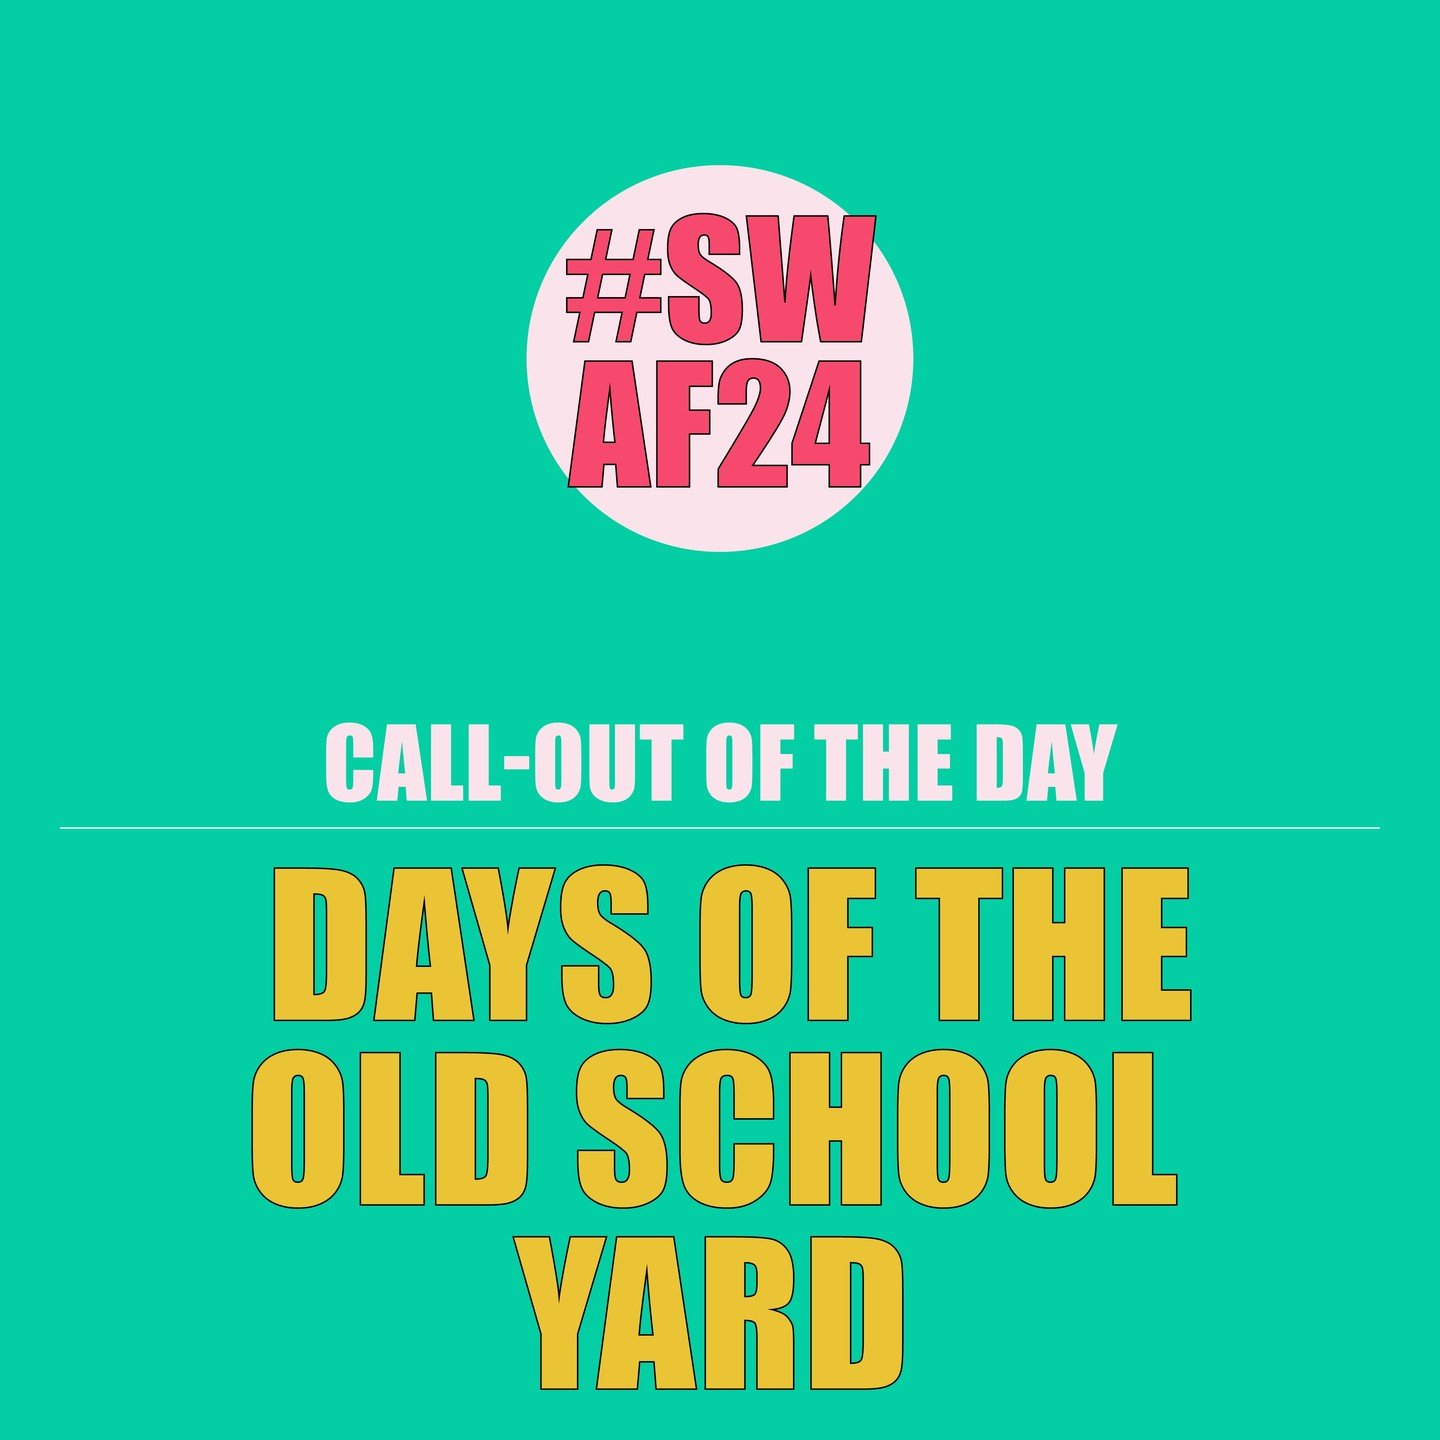 Exhibition: Days of the old school yard

Curated by: Deirdre Levy 

As a curator with Swindon Alternative Festival 24 I am looking for people who were at school as teenagers in Swindon sometime between 1959 and 1965. The relevant people just need mem